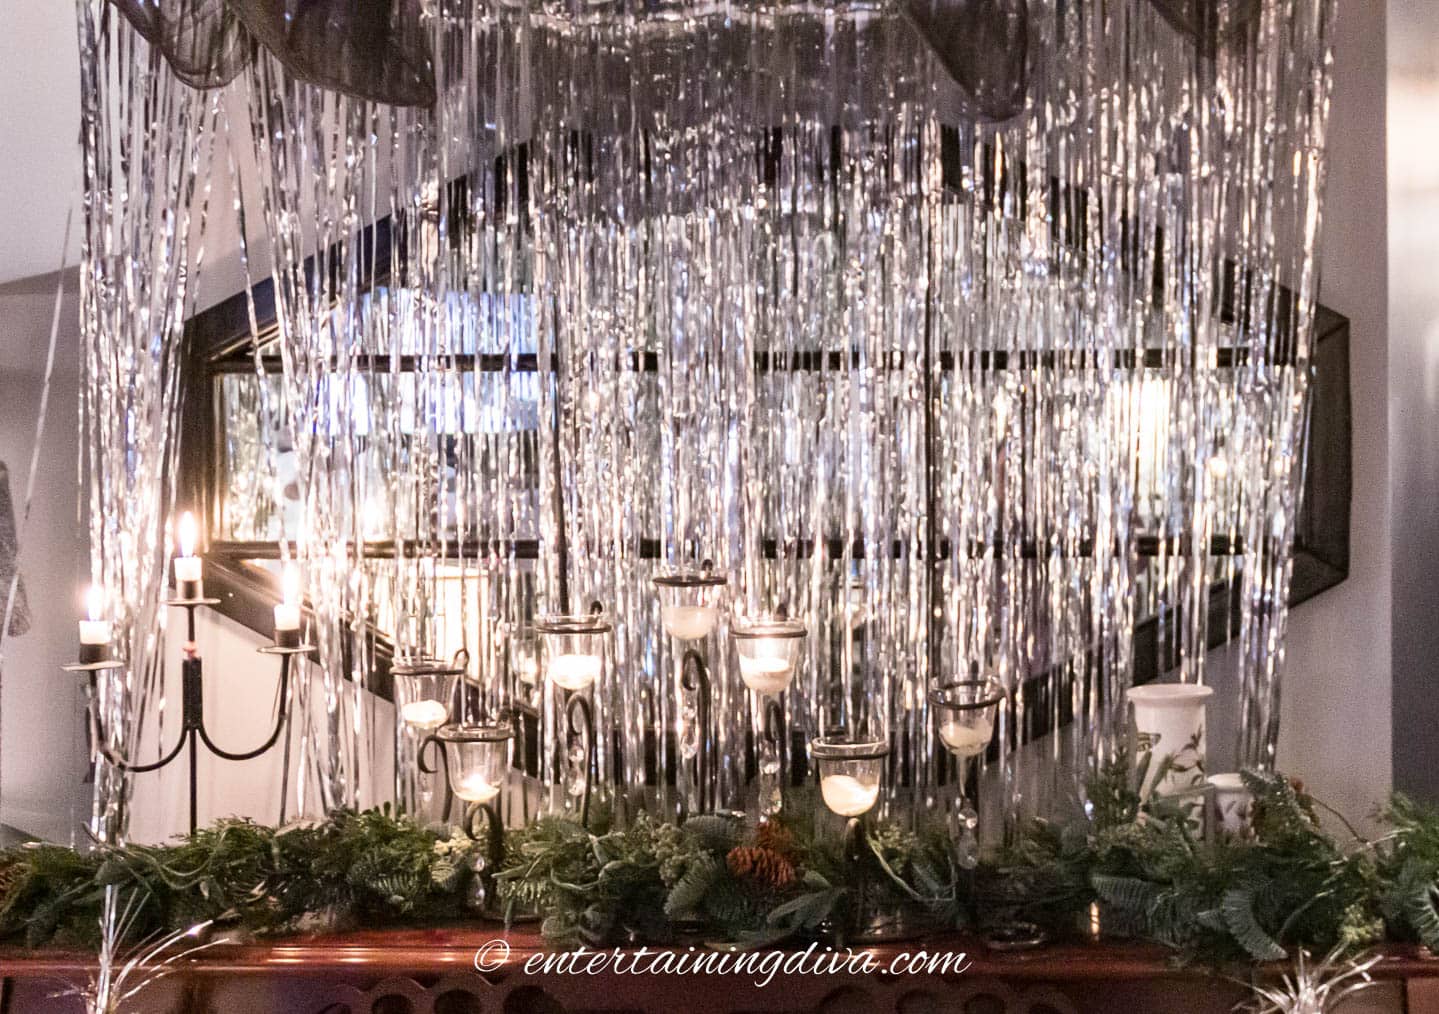 Candles in an evergreen garland with a silver foil curtain behind